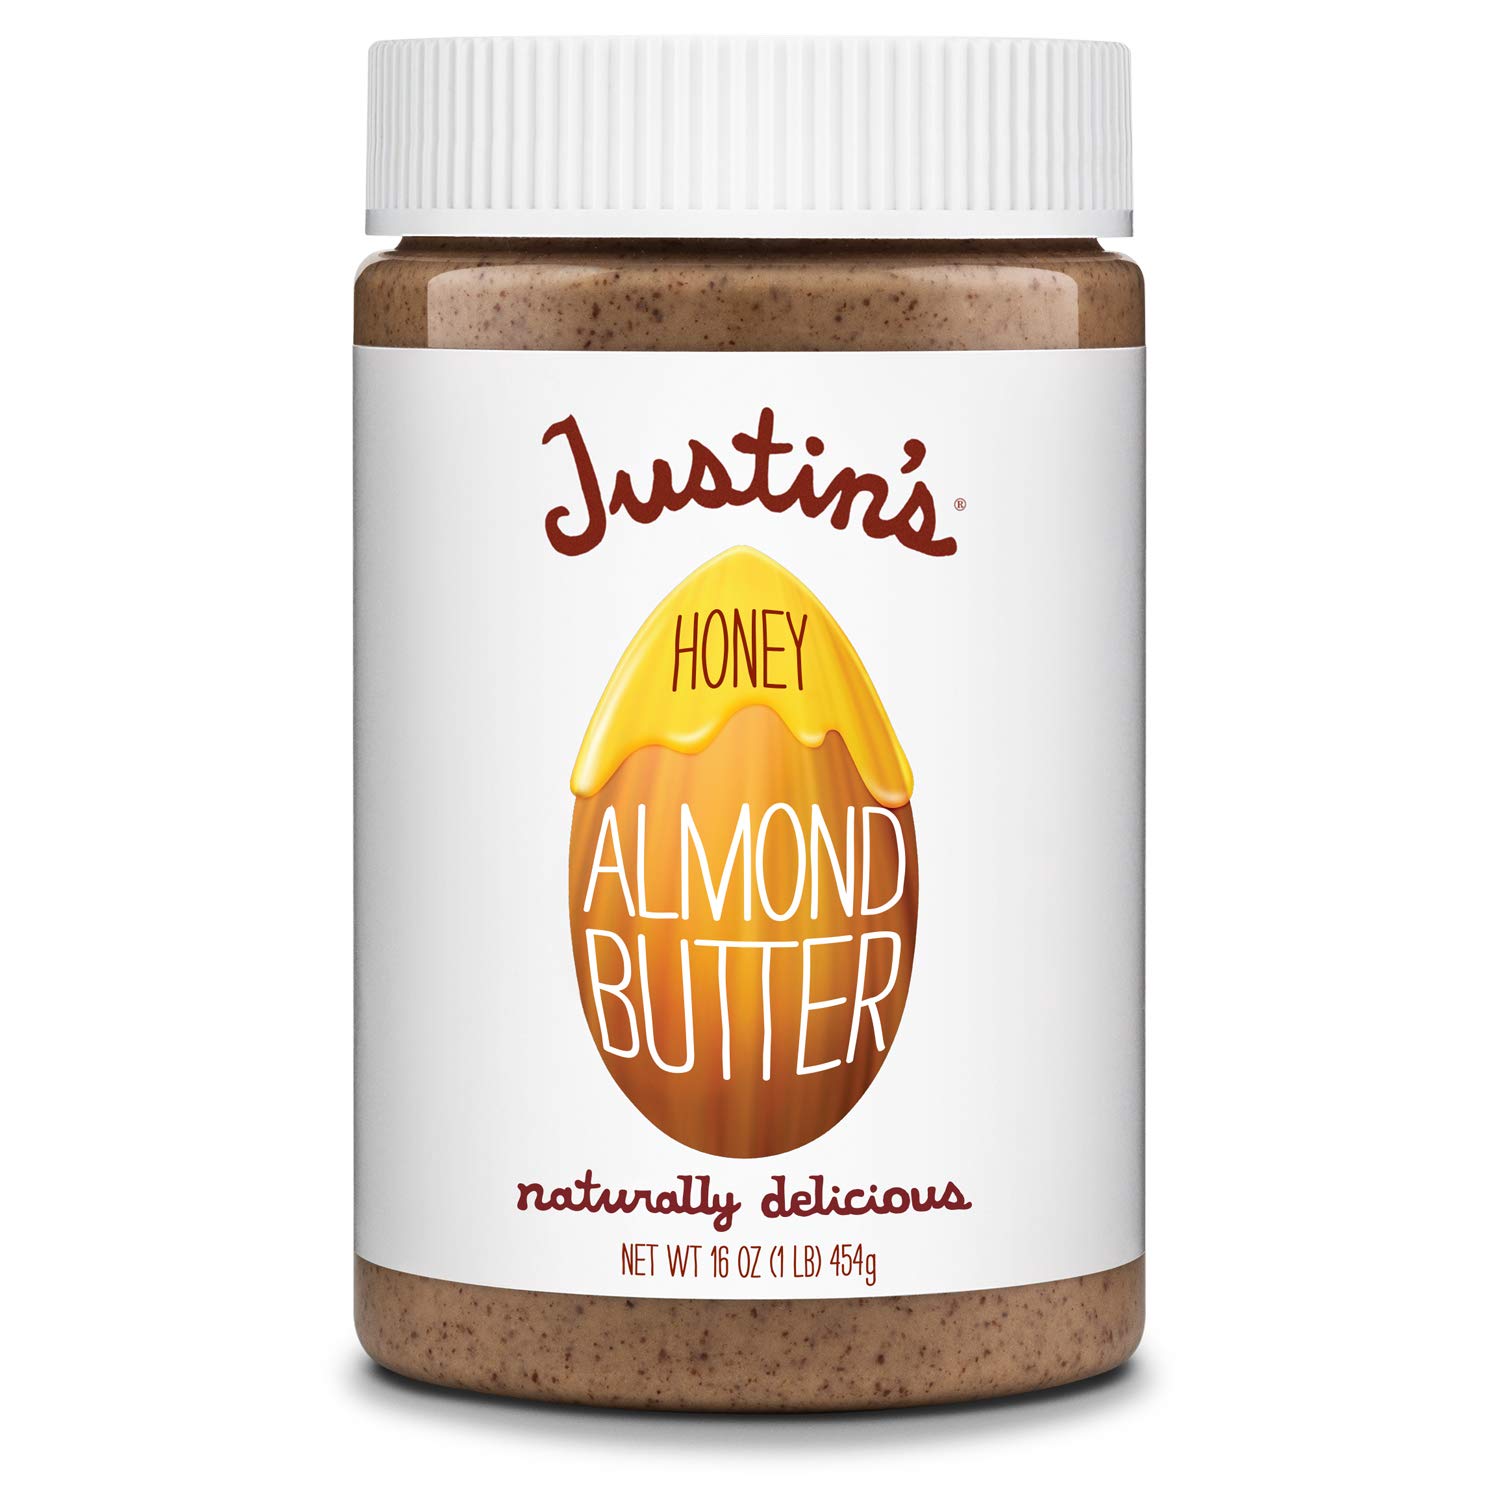 16-Oz Justin's Honey Almond Butter $6.49 w/ S&S + Free Shipping w/ Prime or on orders over $35